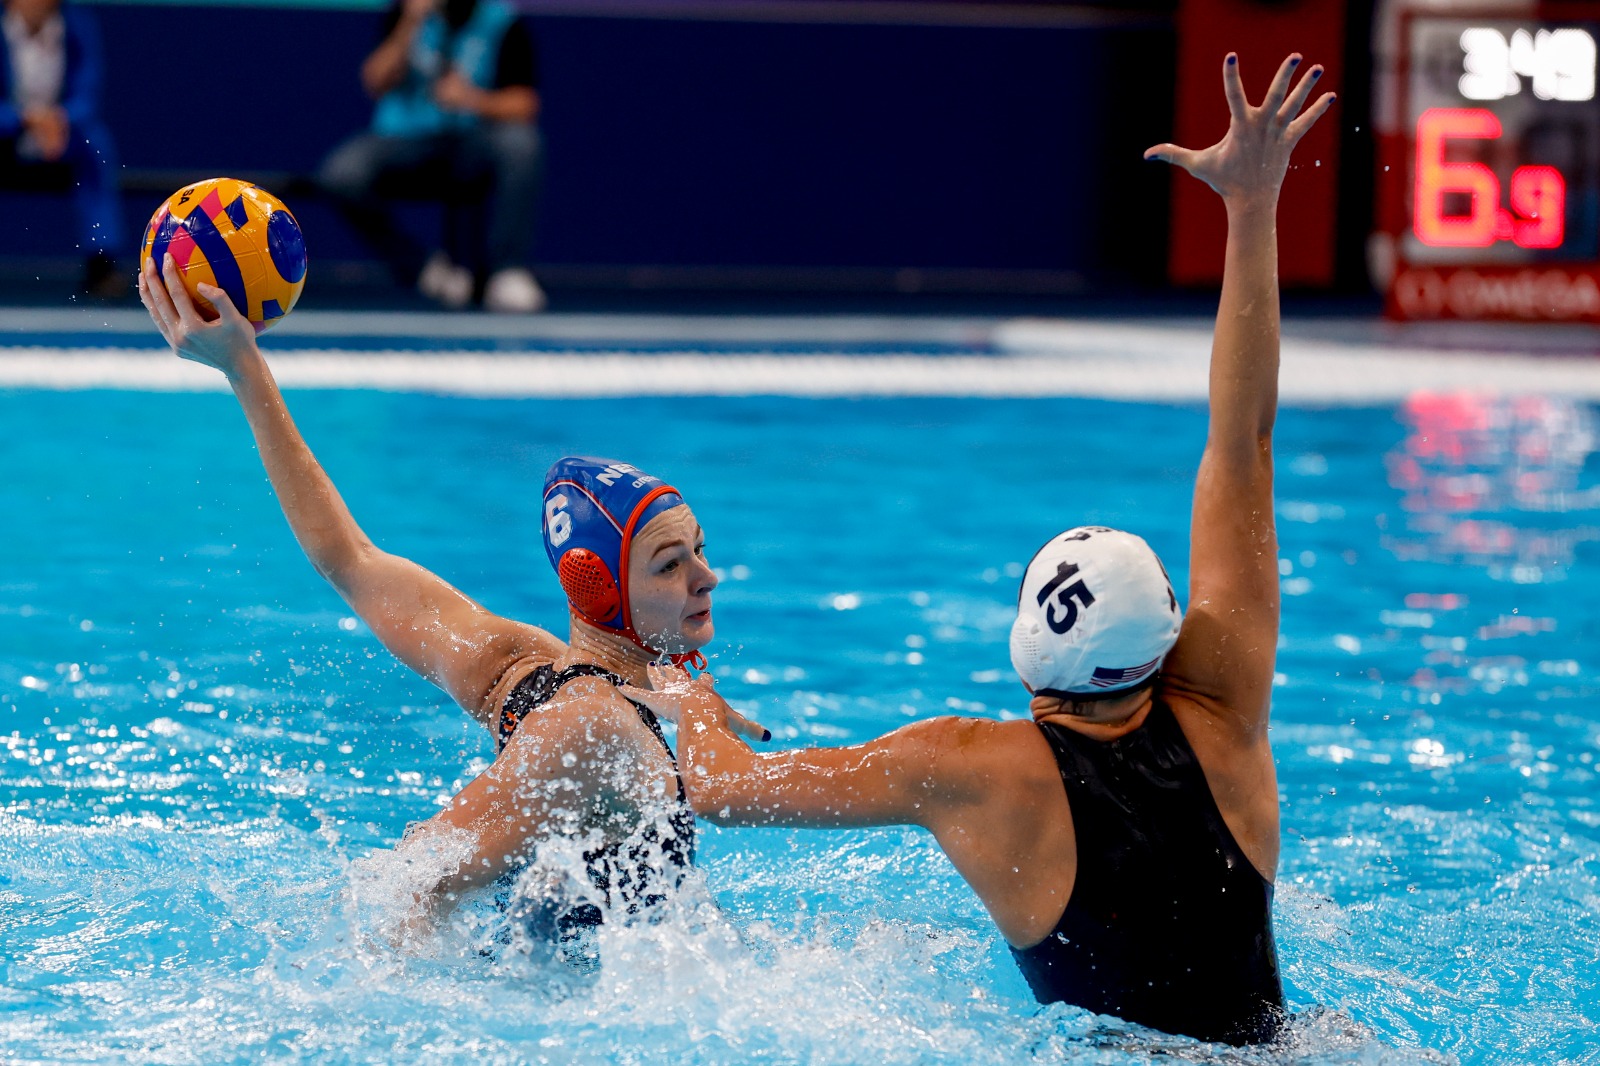 Olympic champion USA beat world champion Netherlands (10-8) in World Cup opener.